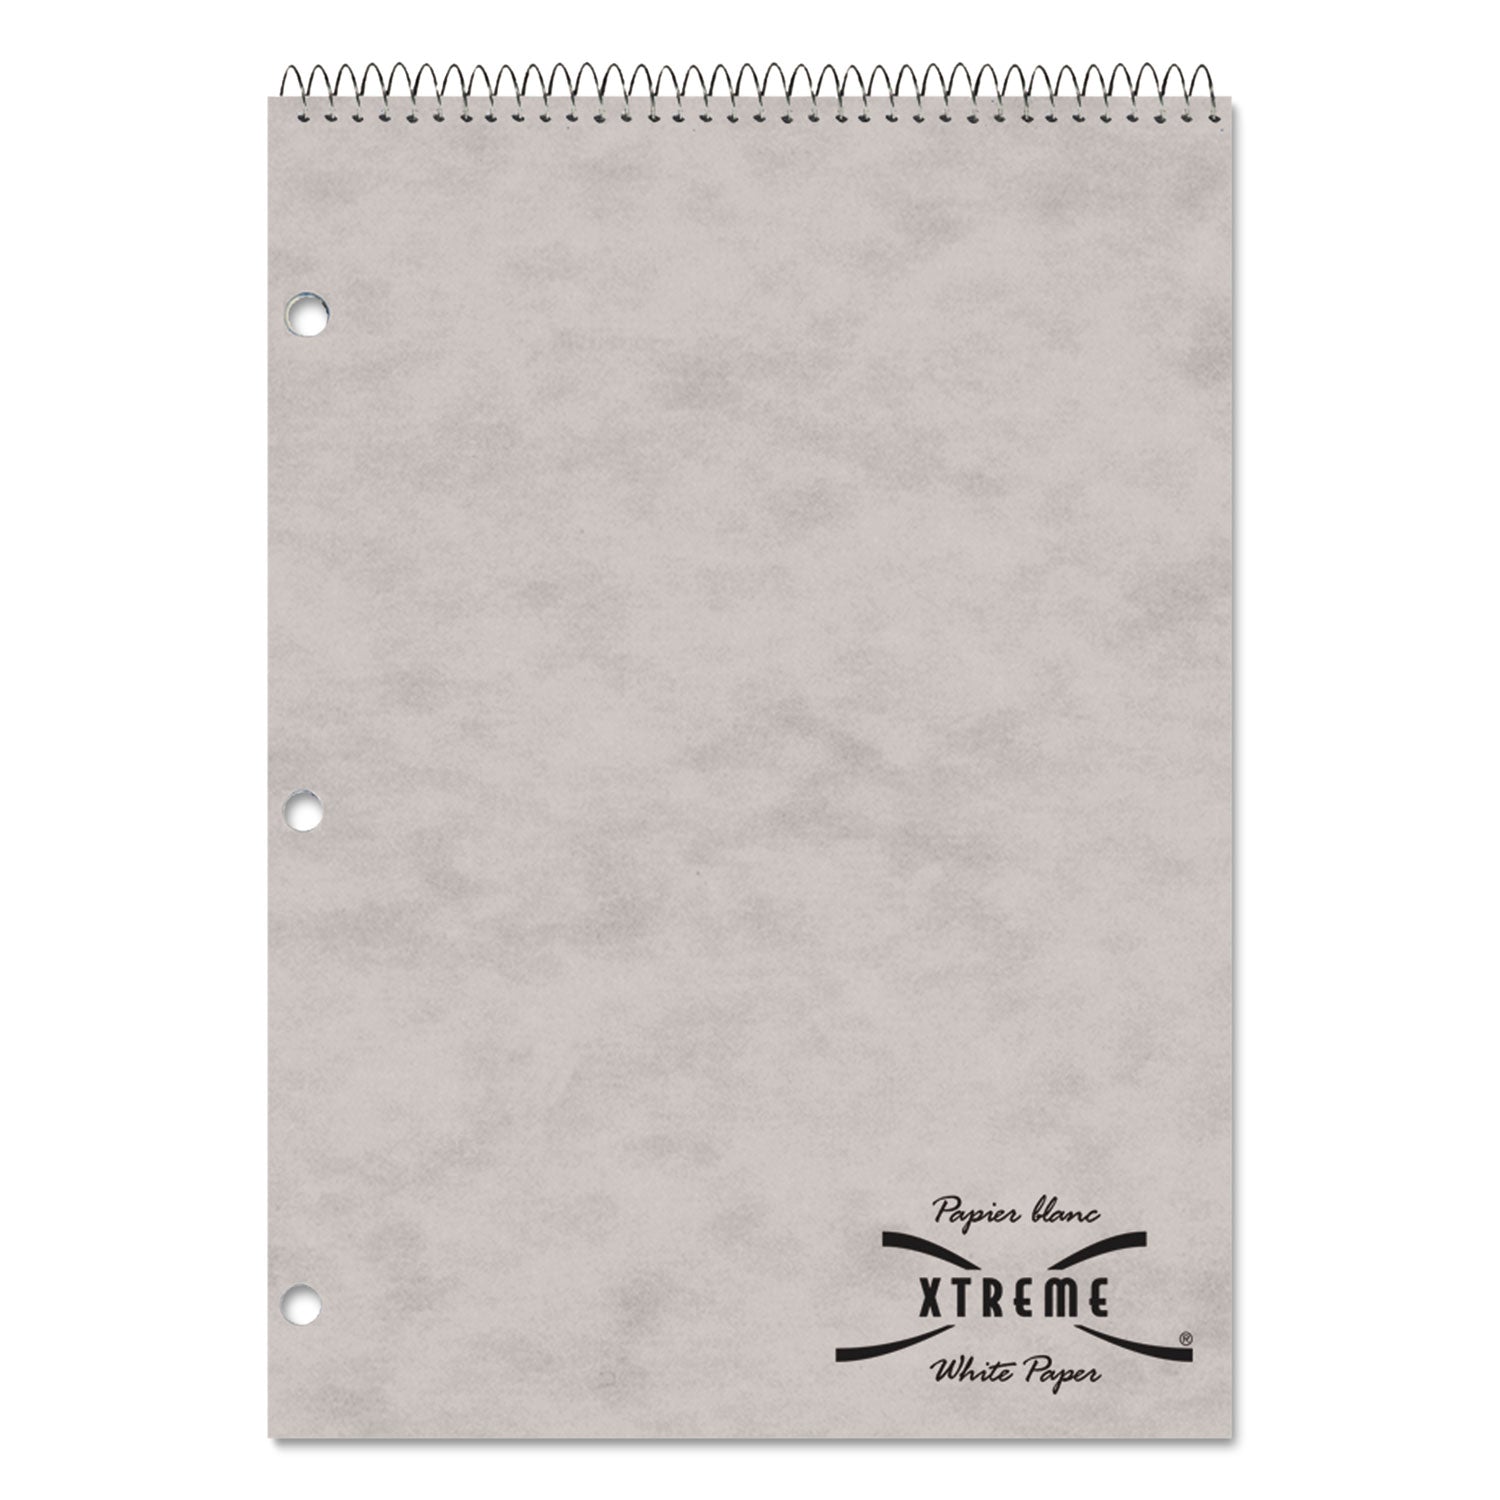 Porta-Desk Wirebound Notepads, Medium/College Rule, Randomly Assorted Cover Colors, 80 White 8.5 x 11.5 Sheets - 